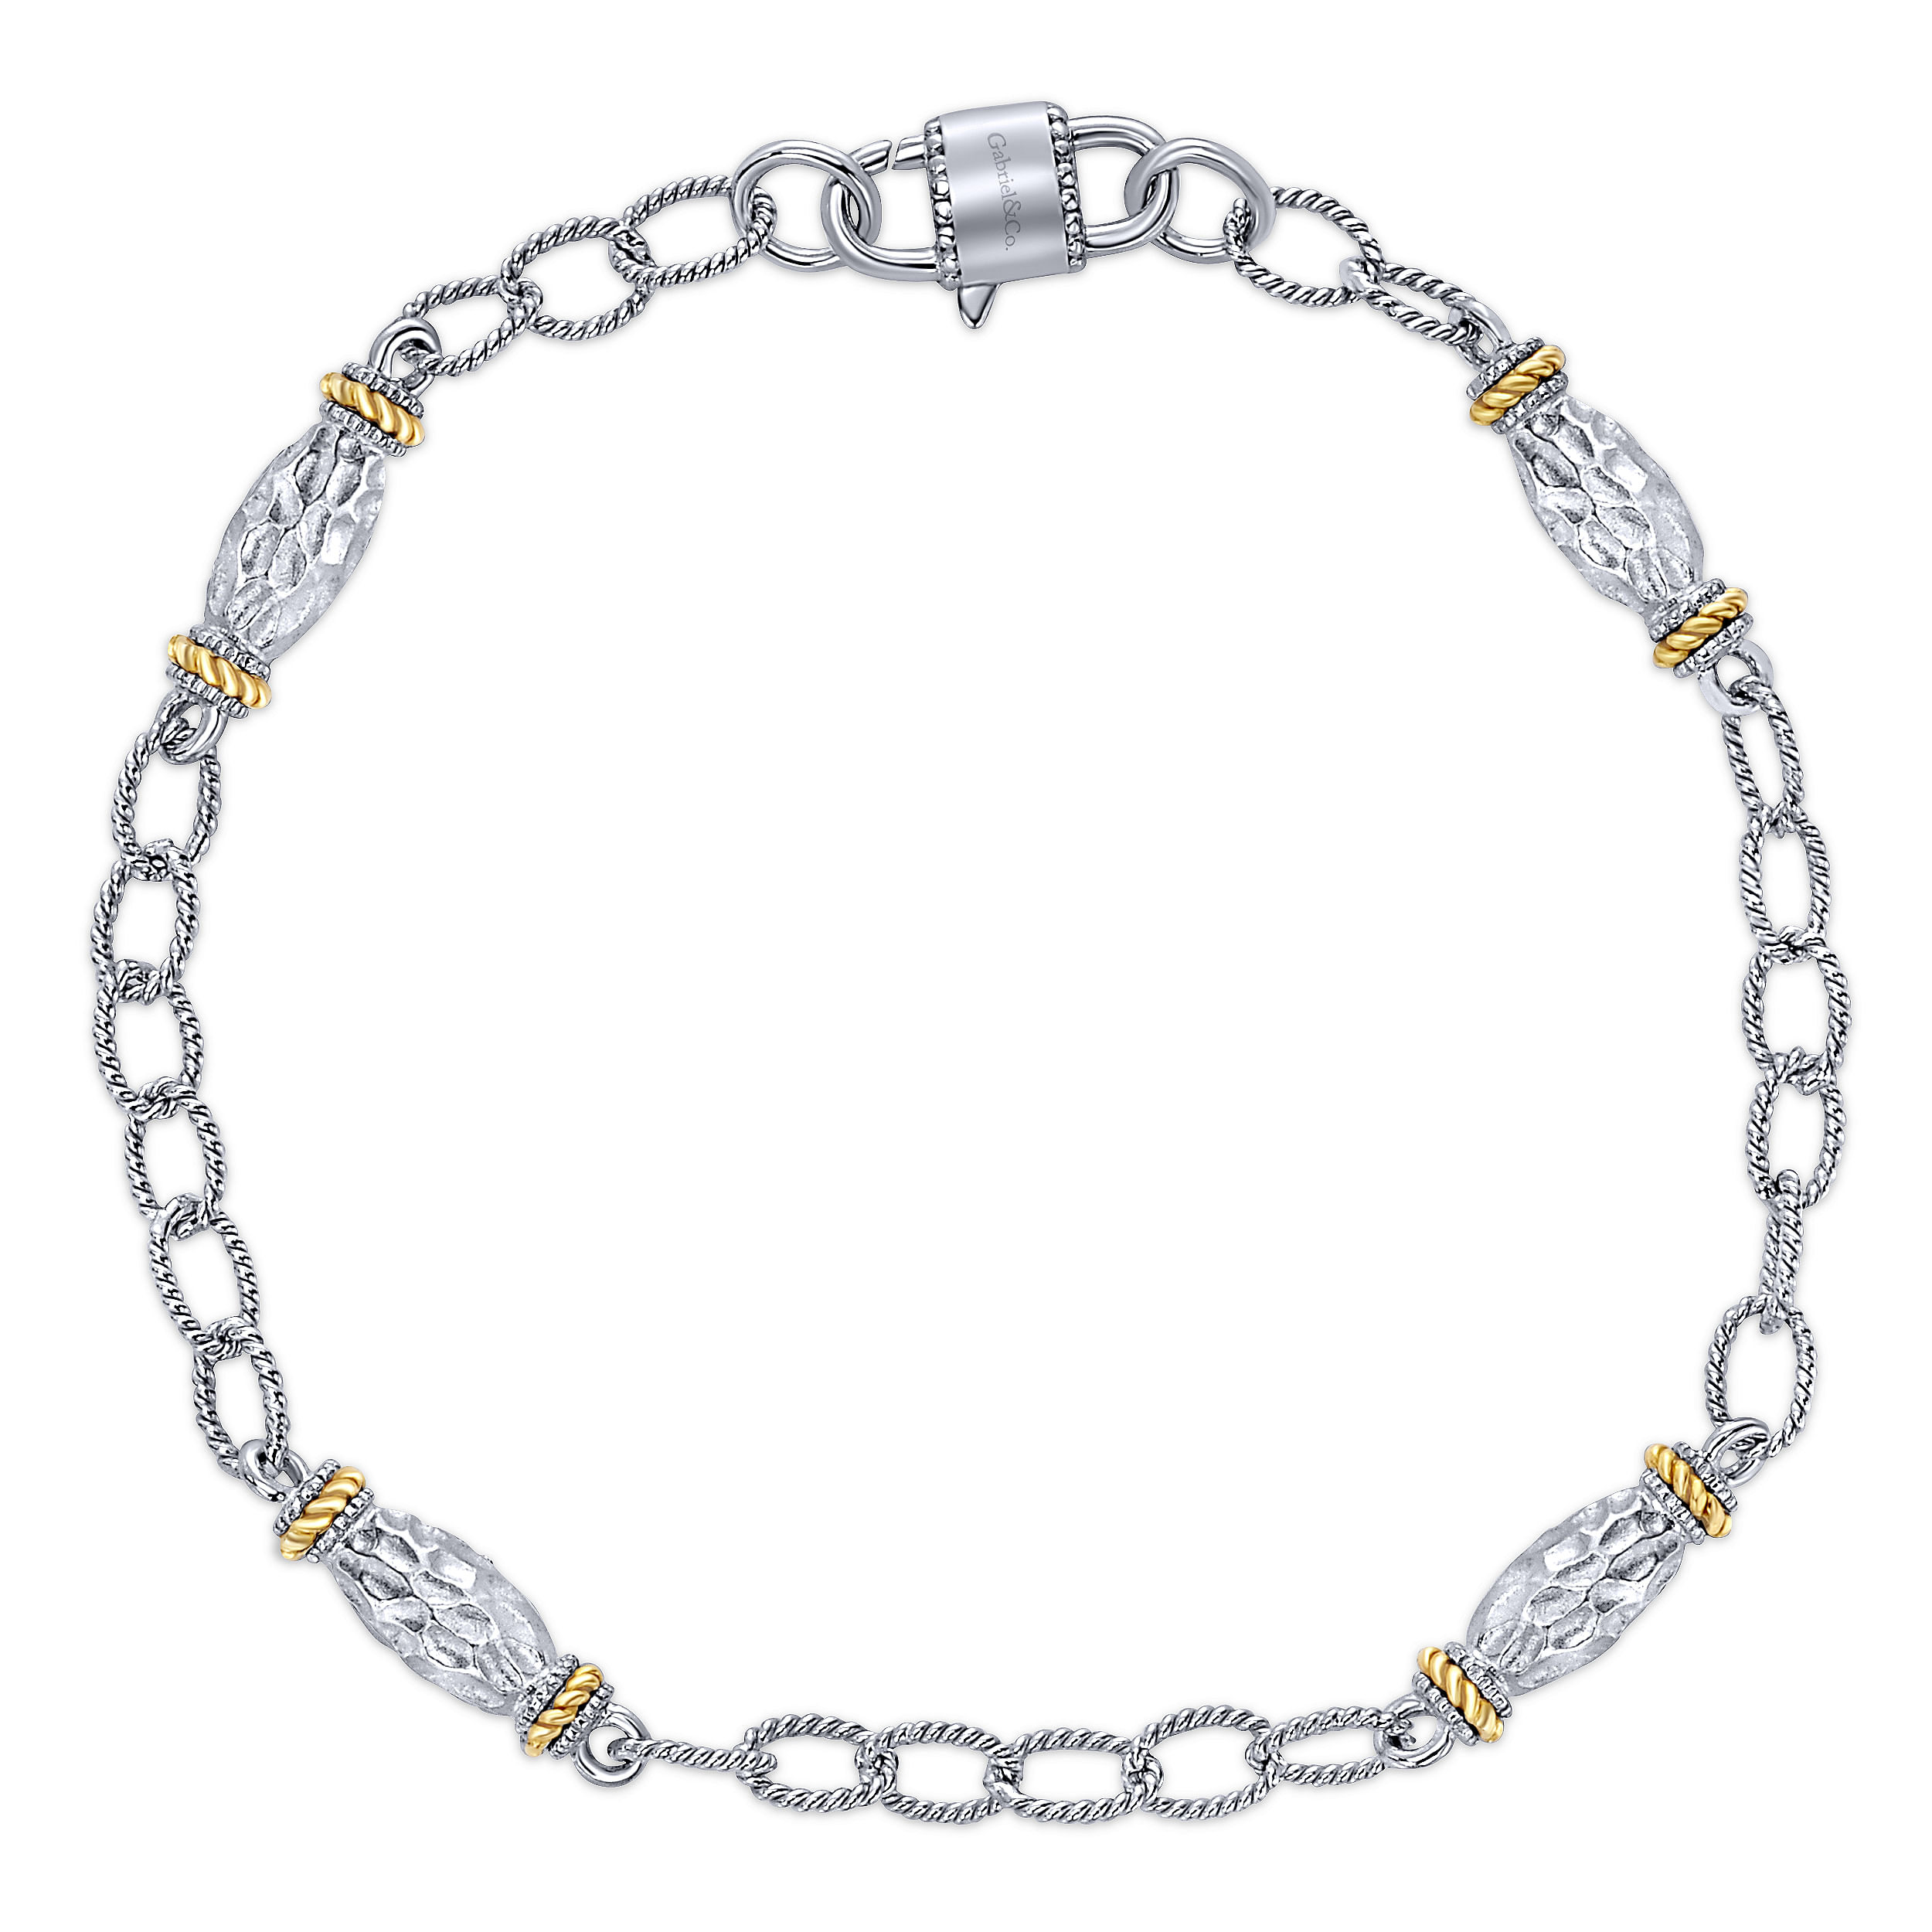 925 Sterling Silver-18K Yellow Gold Chain Bracelet with Filigree Stations